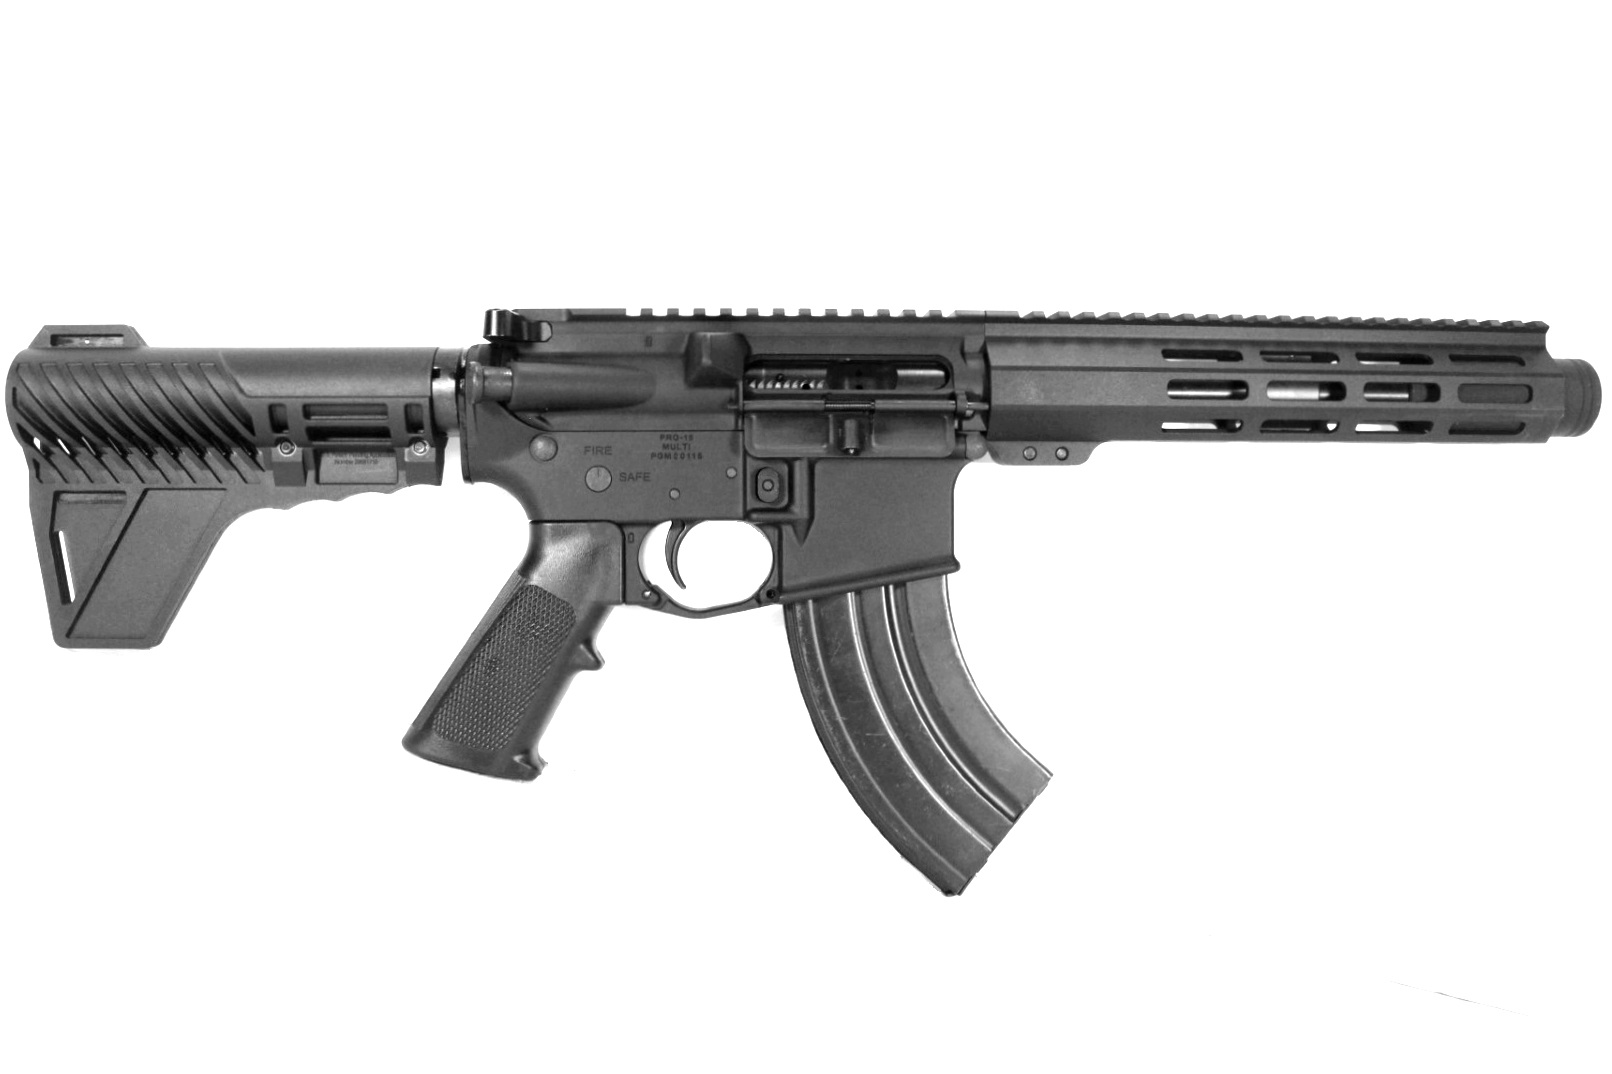 Pro2A Tactical's Patriot 7.5 inch AR-15 7.62x39 M-LOK Complete Pistol with flash can